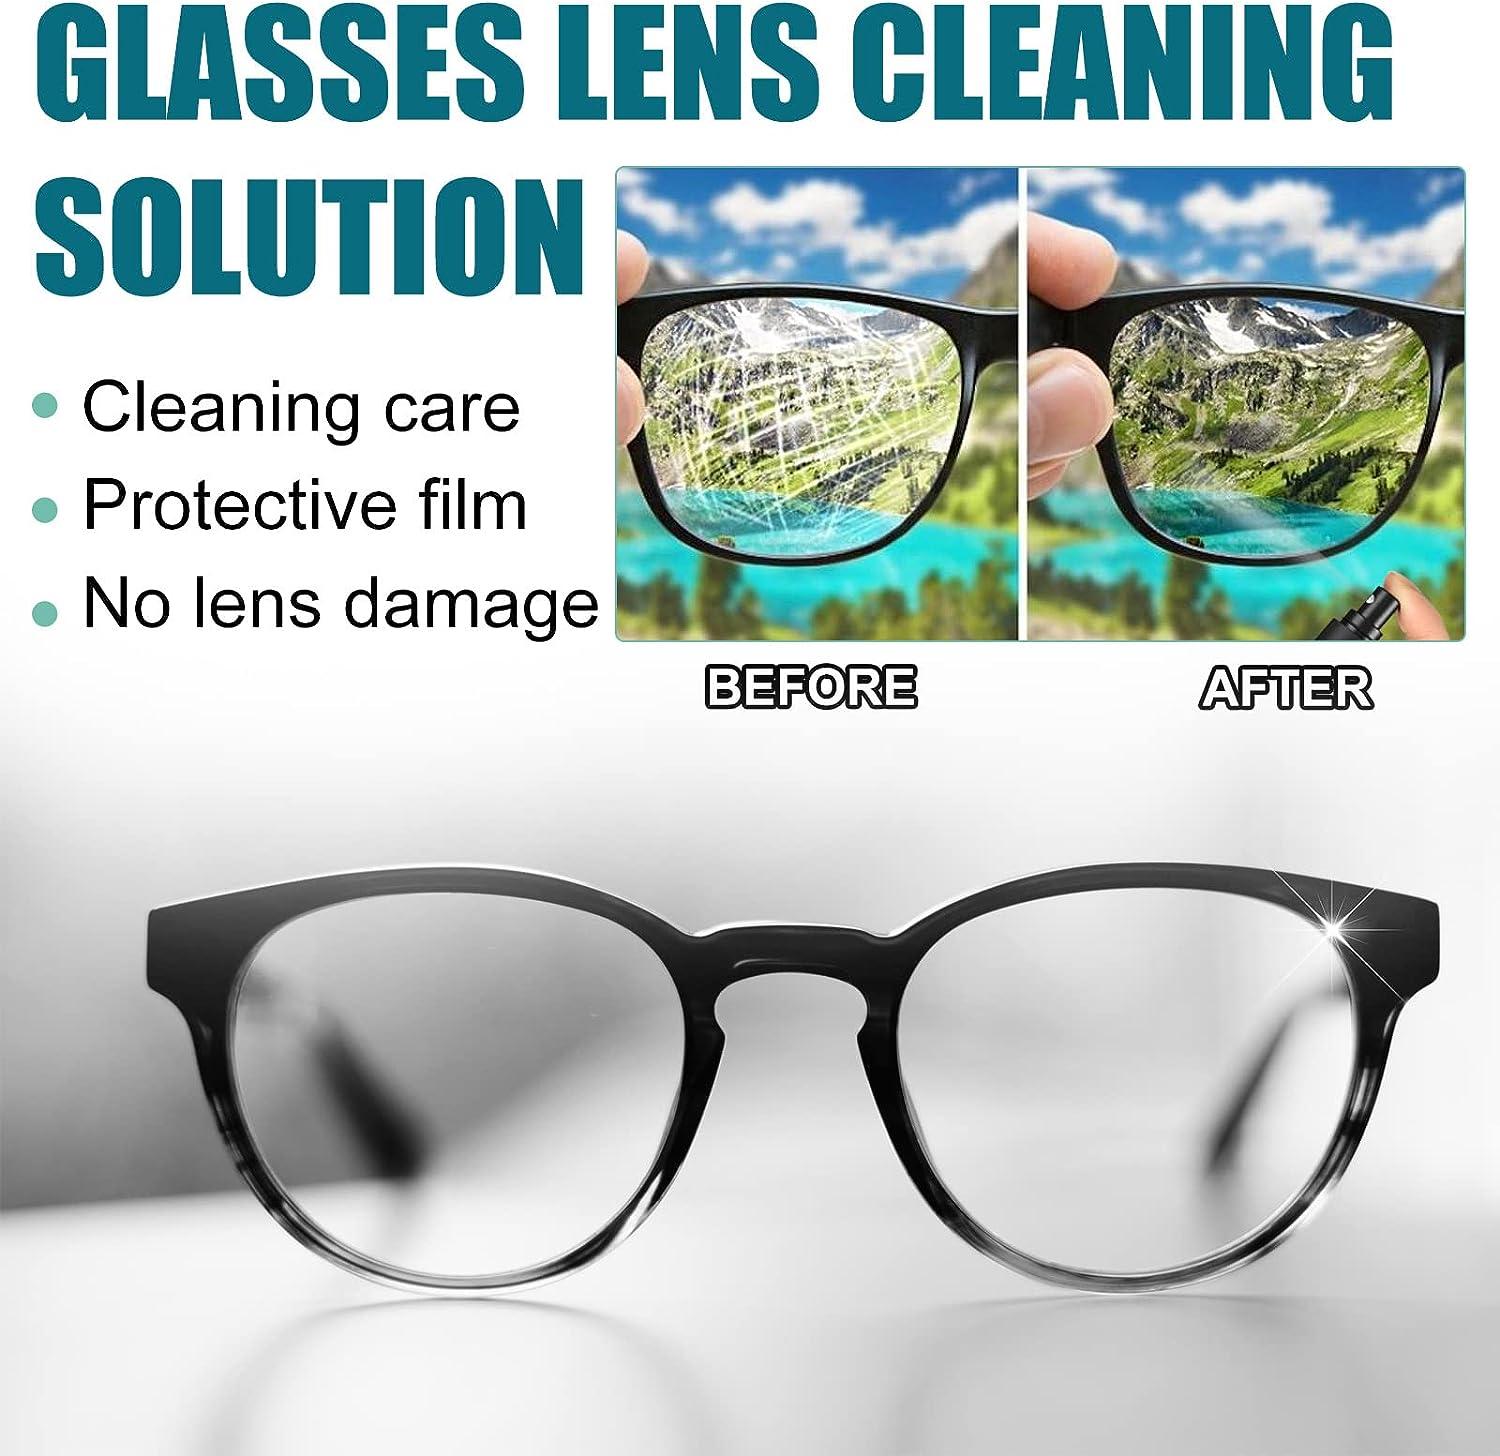 2023 New Lens Scratch Removal Spray, For Glasses And Sunglasses Scratch And  Lens Cleaner Spray ,Glass Scratch Repair Fluid, Lens Scratch